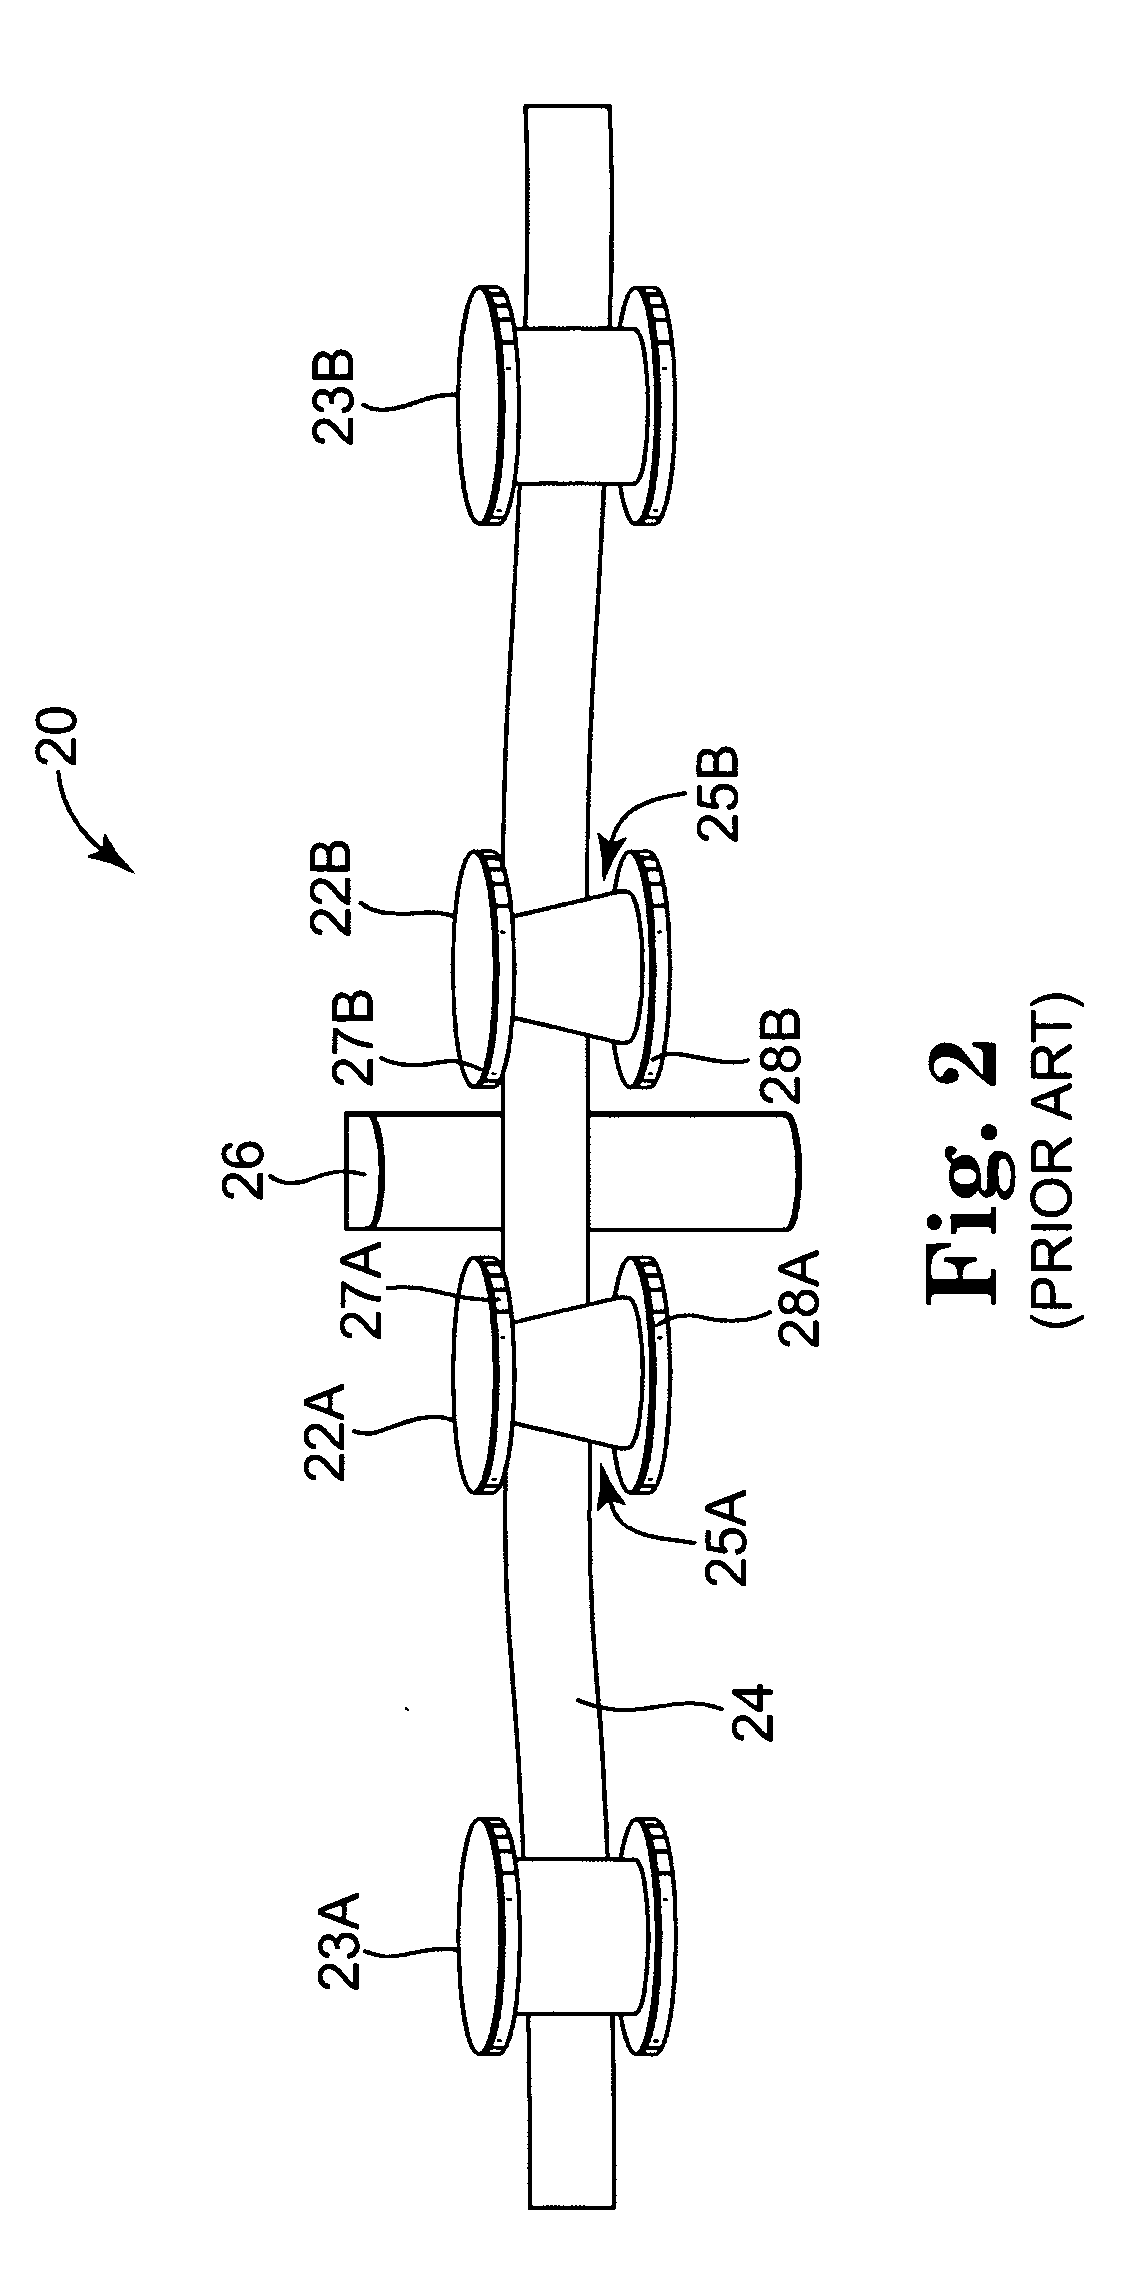 Data storage tape guiding systems using tapered guides